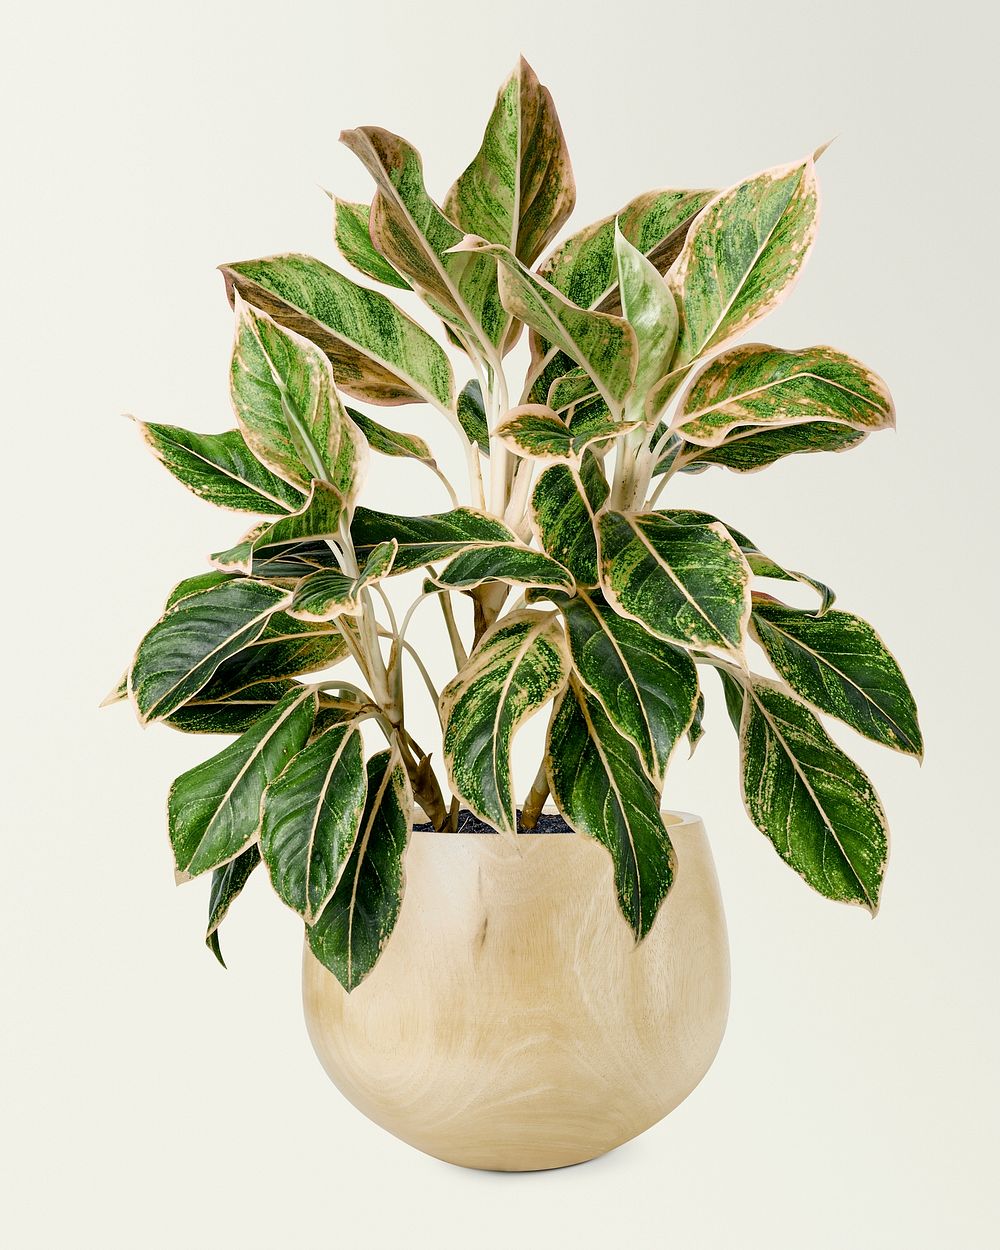 Chinese evergreen in a wooden pot